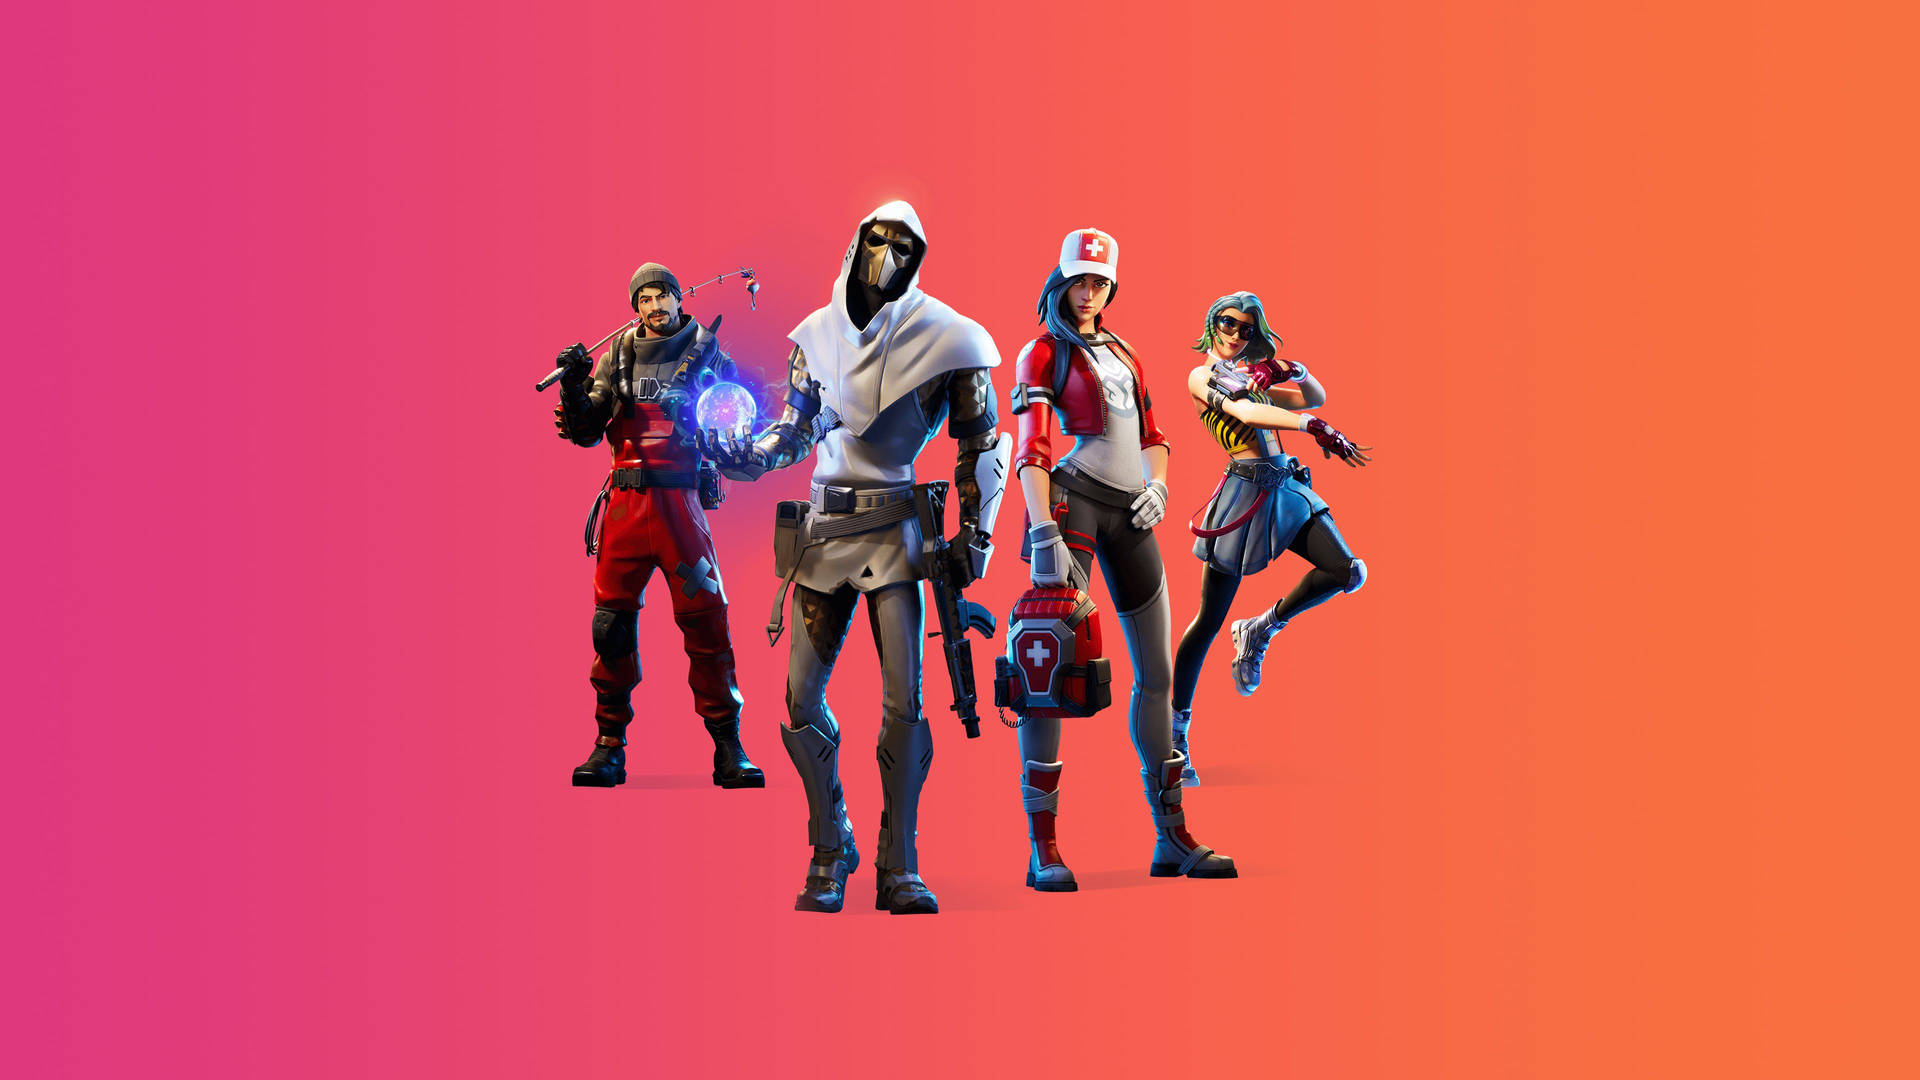 Fortnite - A Group Of People Standing On An Orange Background Wallpaper